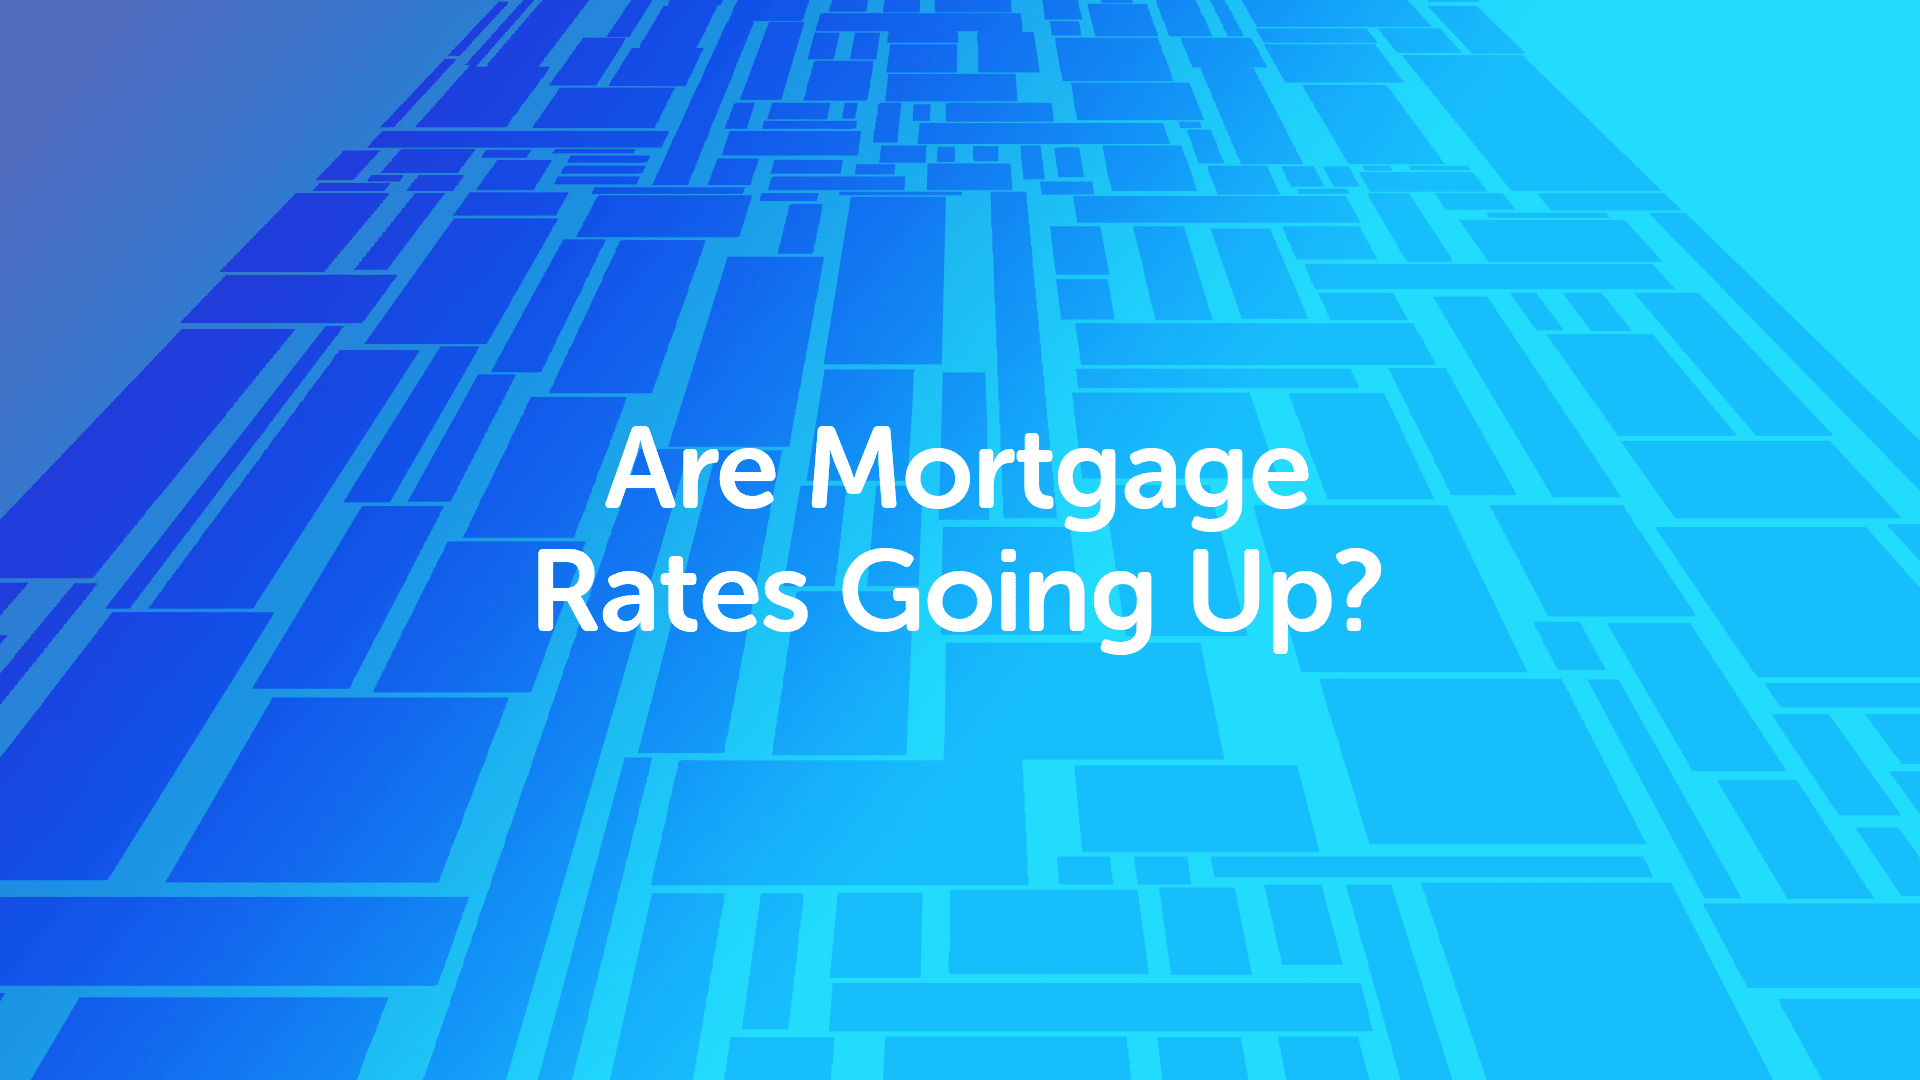 Are Mortgage Rates Going Up in Manchester